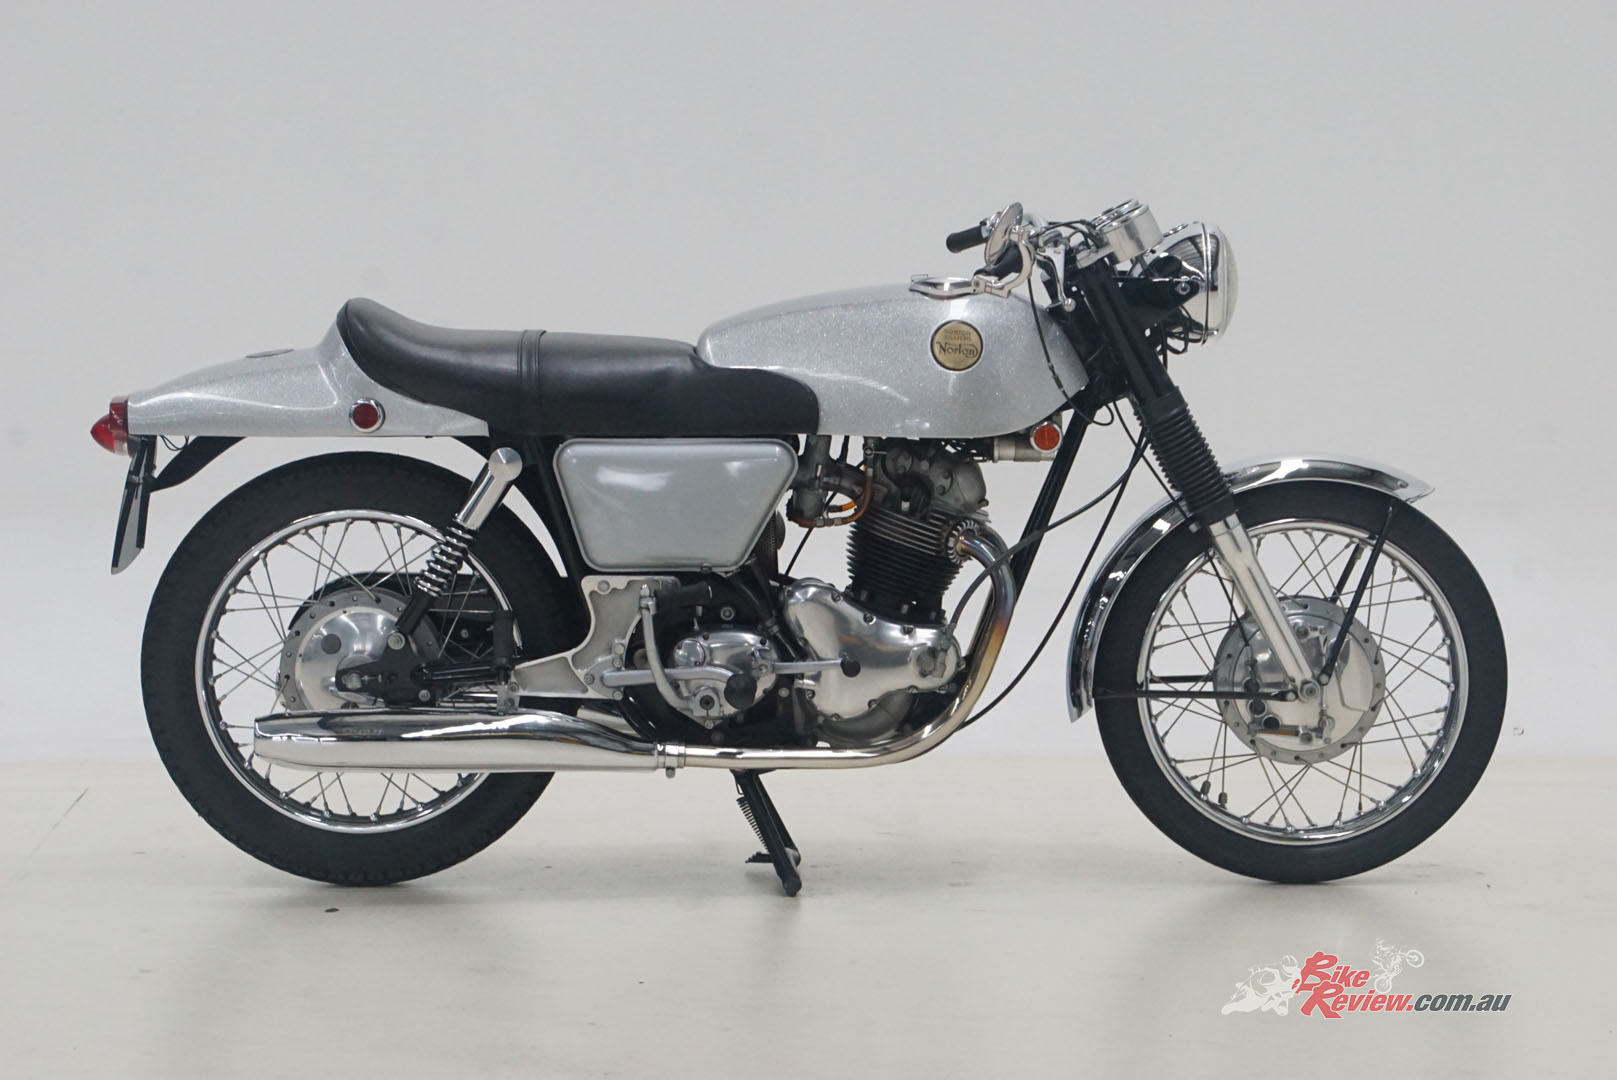 This fully restored and award winning 1968 Norton Commando 750cc is expected to be in demand amongst collectors and sell in the $22,000 - $28,000 range.